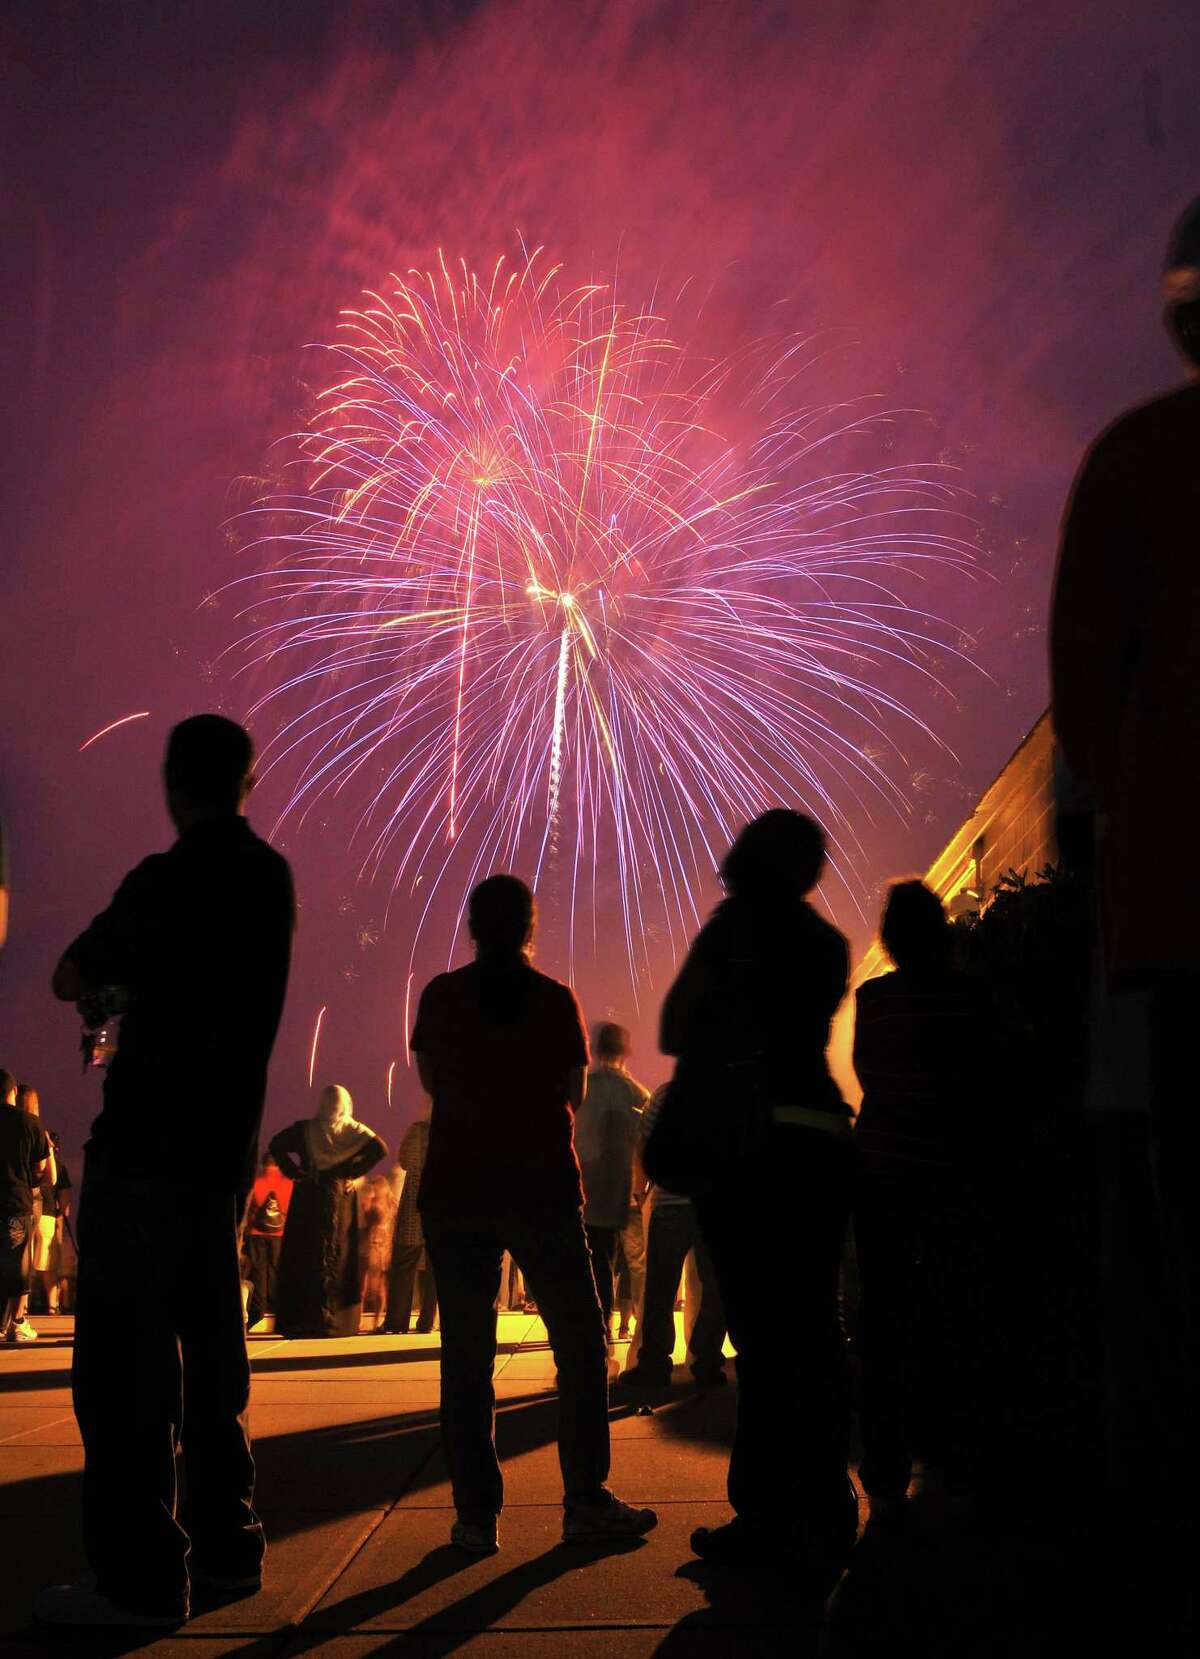 West Haven fireworks canceled because of coronavirus pandemic